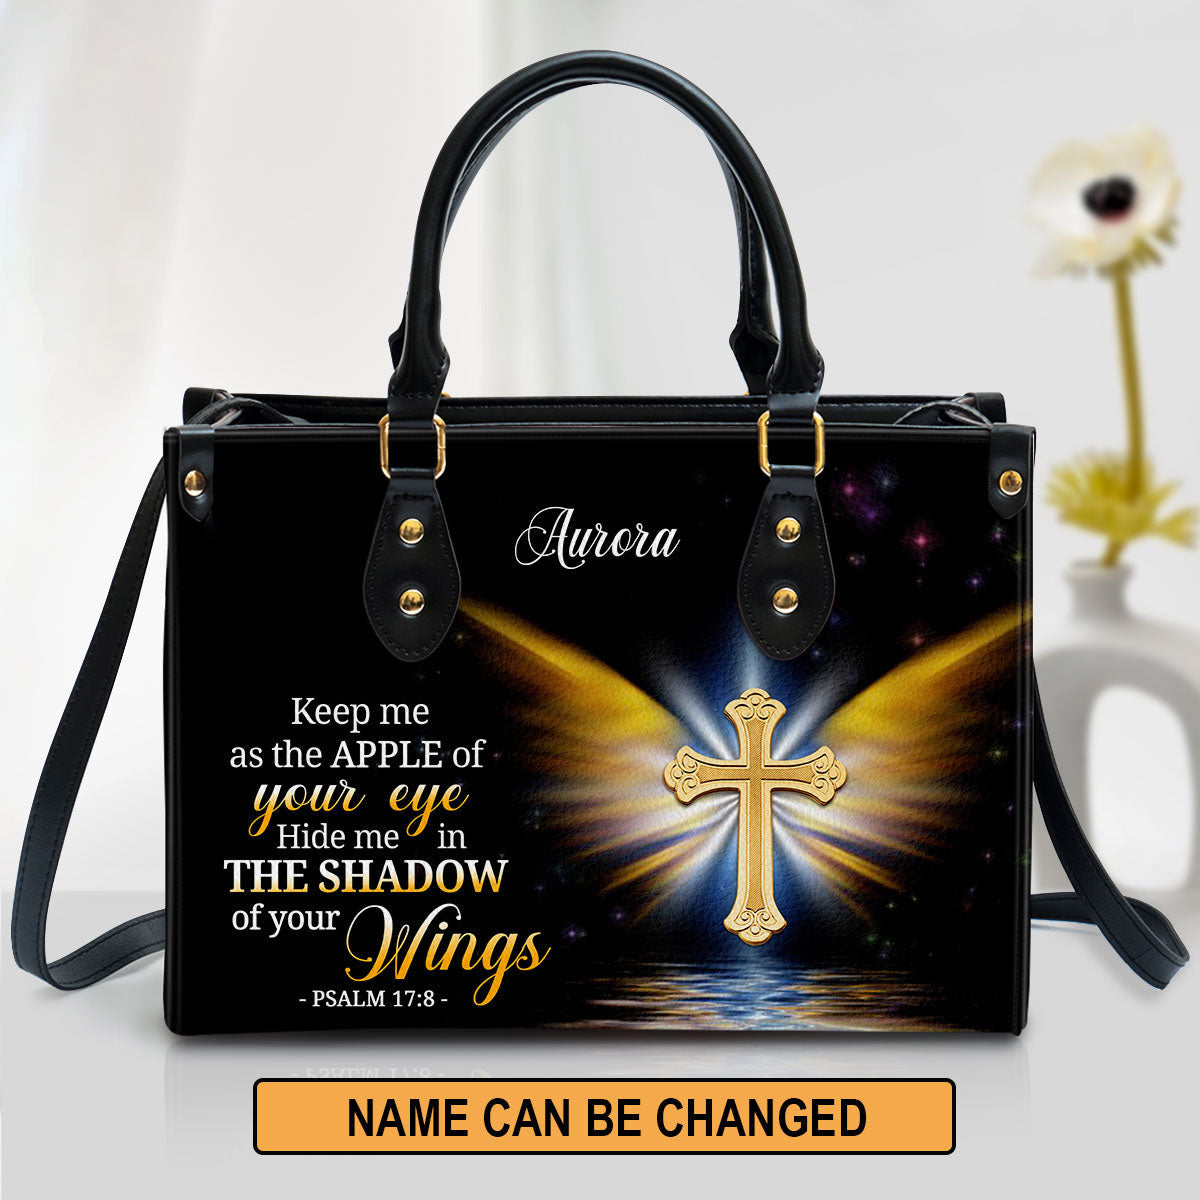 Hide Me In The Shadow Of Your Wings Psalm 17 8 Leather Bag - Personalized Leather Bible Handbag - Christian Gifts for Women